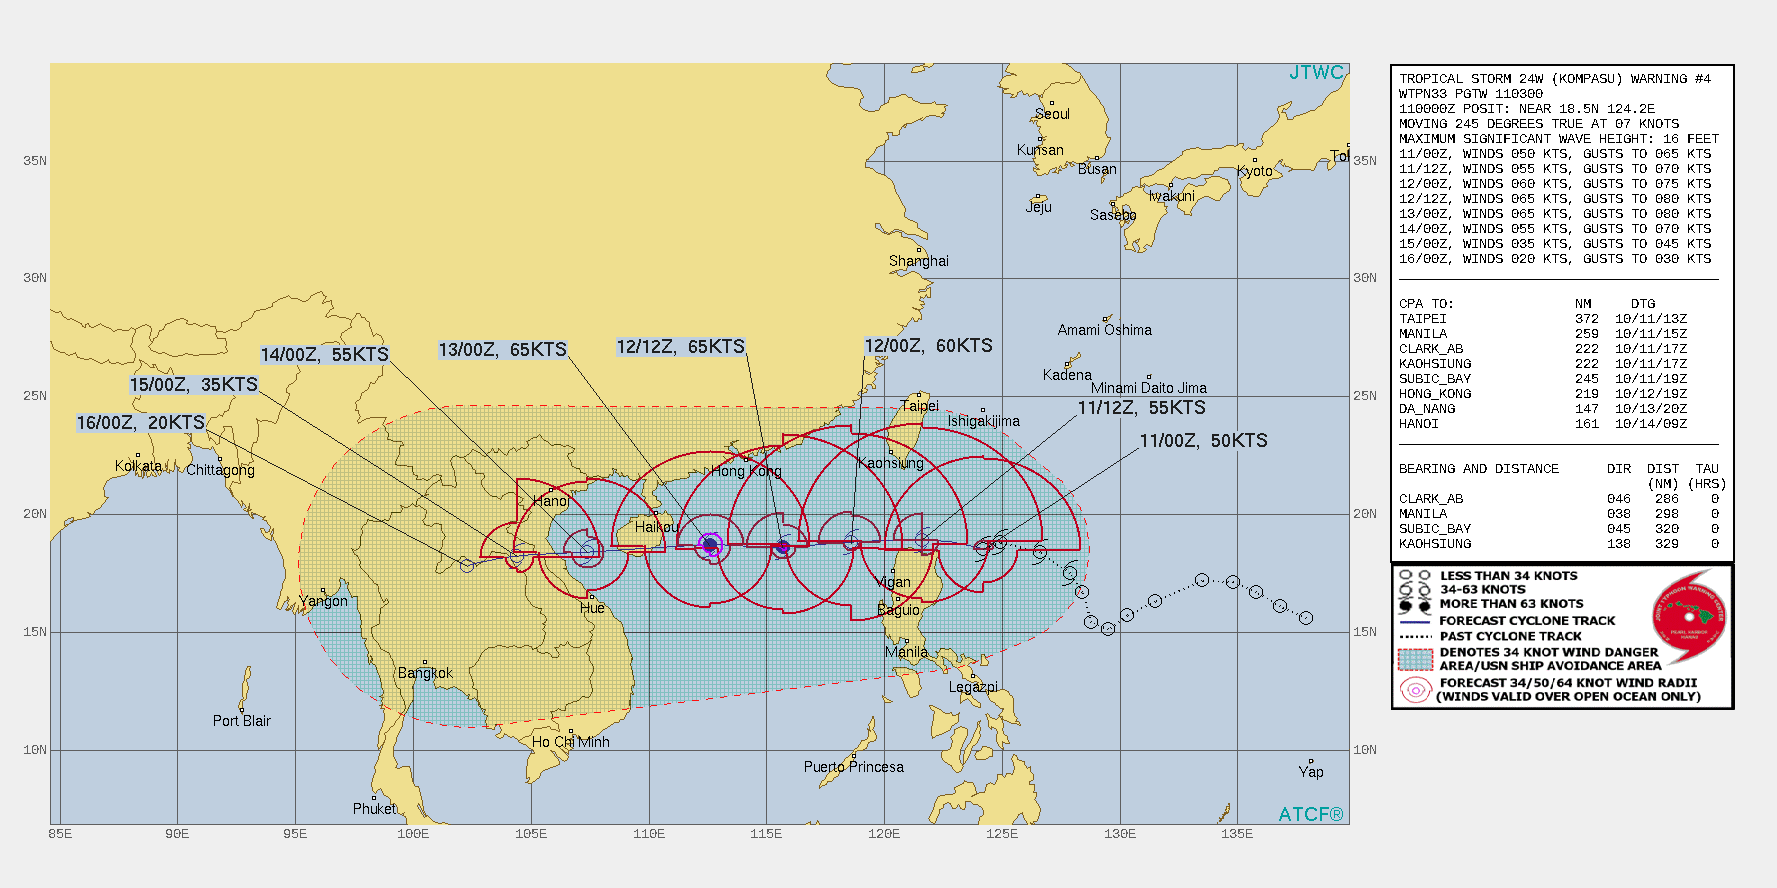 FORECAST REASONING.  SIGNIFICANT FORECAST CHANGES: THERE ARE NO SIGNIFICANT CHANGES TO THE FORECAST FROM THE PREVIOUS WARNING.  FORECAST DISCUSSION: THE SUBTROPICAL RIDGE(STR) WILL BUILD AND EXTEND FROM WESTWARD, THIS WILL CONTINUE DRIVING THE SYSTEM WESTWARD THROUGH THE LUZON STRAIT AND INTO THE SOUTH CHINA SEA (SCS). THE RIDGE OVER SOUTHEASTERN CHINA WILL ALSO INFLUENCE THE SYSTEM, FORCING THE MOVEMENT ACROSS HAINAN AND THE GULF OF TONKIN BEFORE MAKING LANDFALL IN NORTHERN VIETNAM BETWEEN 48/60H. THE ENVIRONMENT IS MORE FAVORABLE IN THE SCS AND TS 24W IS EXPECTED TO REACH A PEAK INTENSITY OF 70KNOTS/CAT 1 NEAR 48H. AFTERWARD, INCREASING VWS AND INTERACTION WITH HAINAN ISLAND WILL WEAKEN THE SYSTEM DOWN TO 60KNOTS AT 72H. AFTER LANDFALL, INTERACTION WITH THE RUGGED VIETNAMESE TERRAIN WILL RAPIDLY ERODE THE SYSTEM DOWN TO 20KNOTS AFTER IT CROSSES INTO LAOS NEAR CAMBODIA.